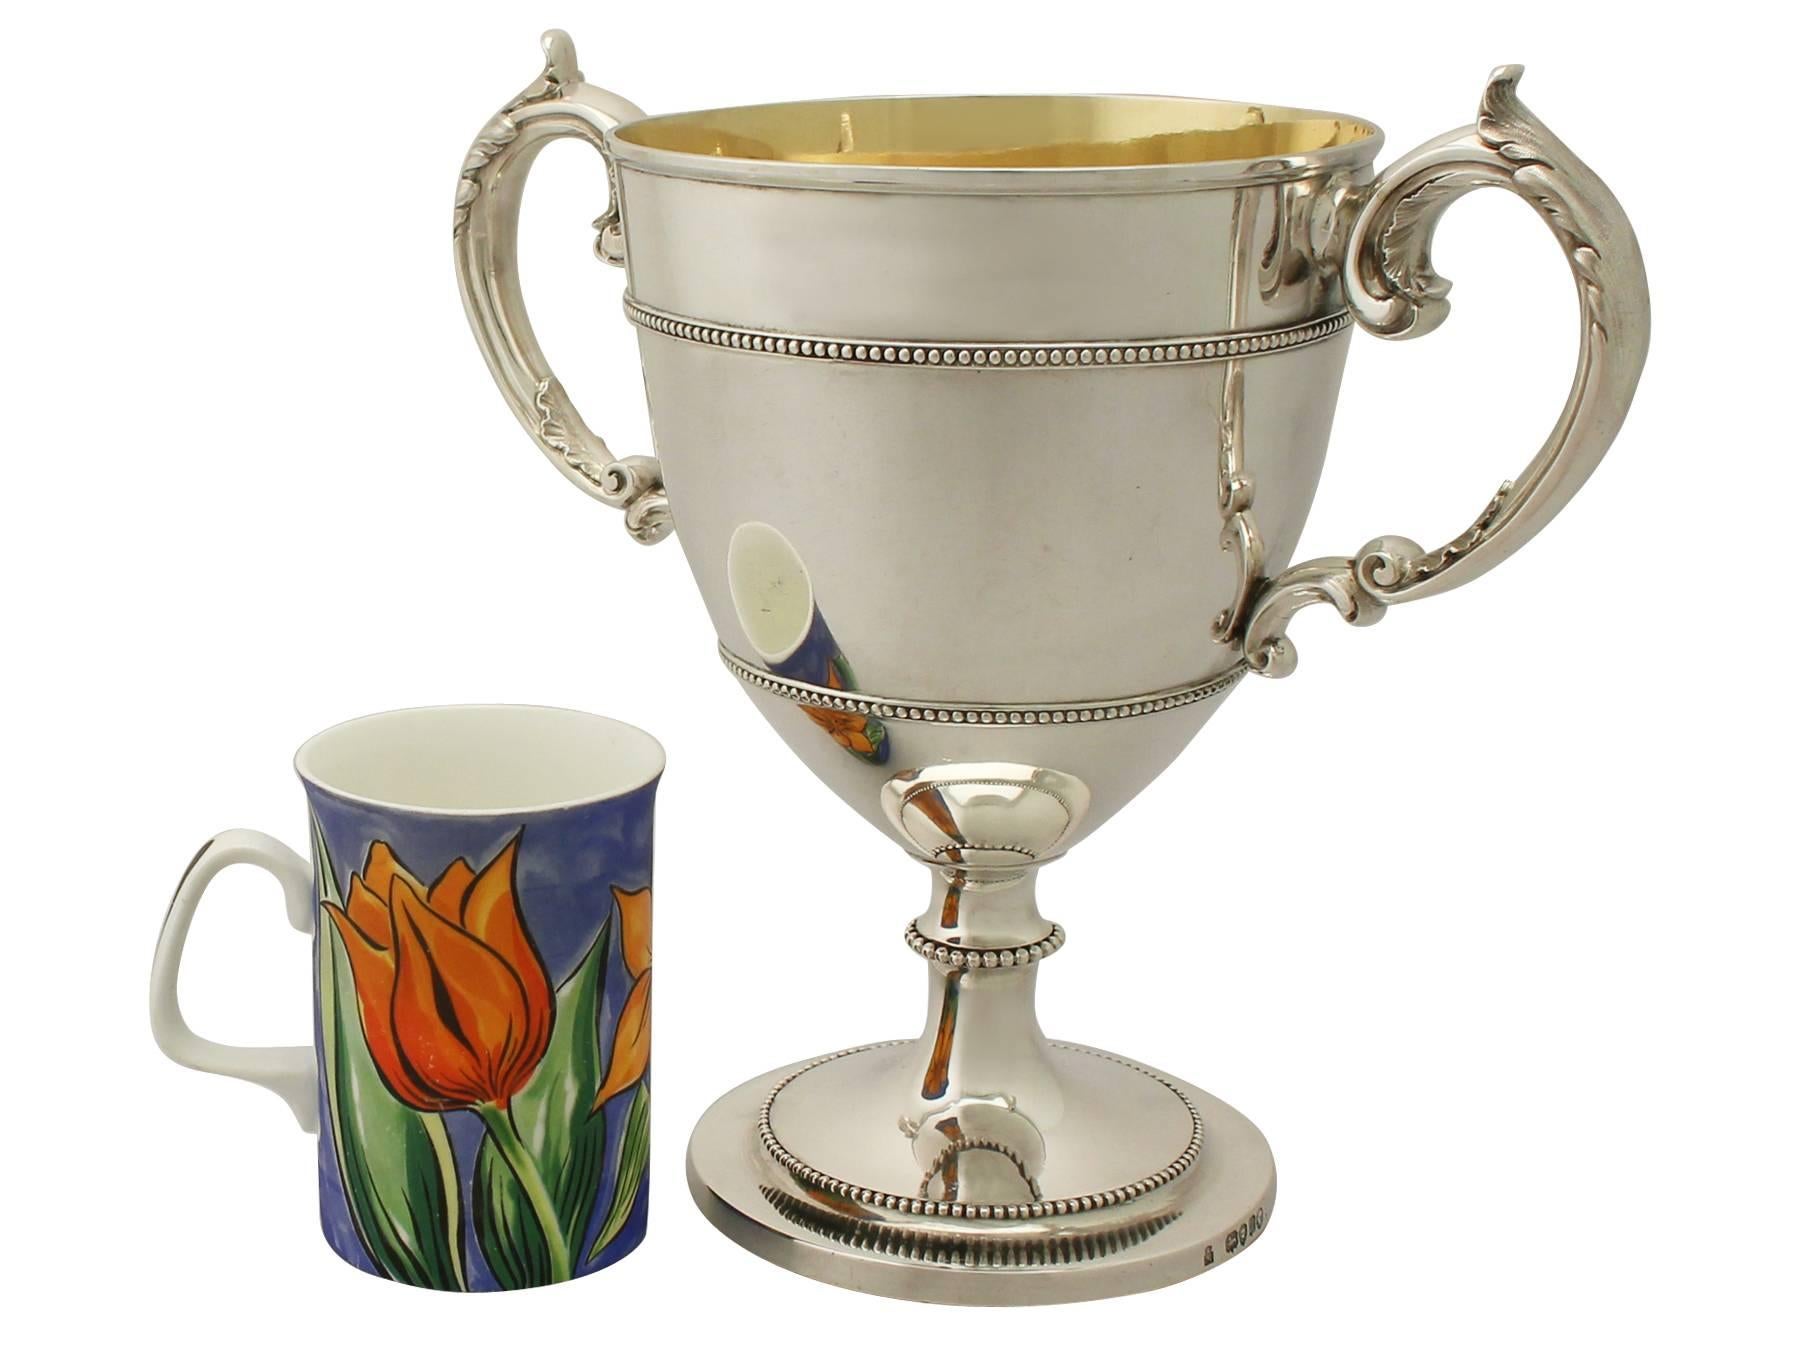 An exceptional, fine and impressive antique Victorian English sterling silver cup; an addition to our presentation silverware collection.

This exceptional antique Victorian sterling silver cup has a bell shaped form to a spreading pedestal